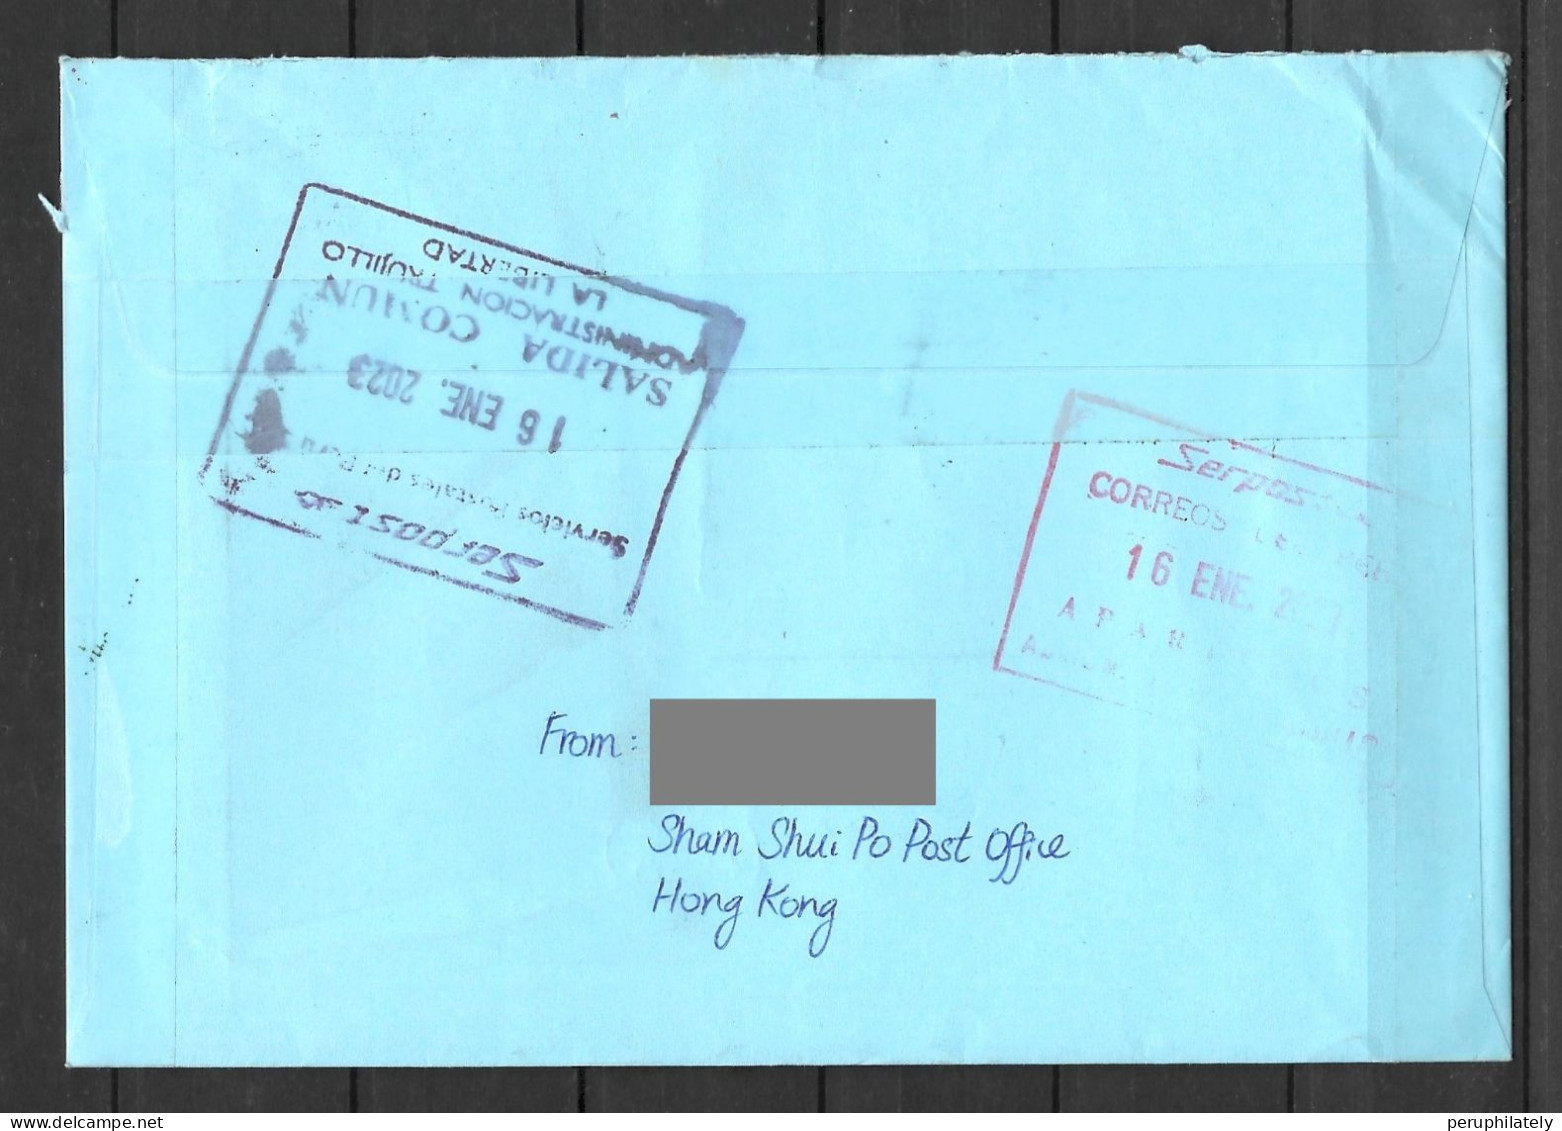 Hong Kong Cover With Year Of The Tiger And Monkey Stamps Sent To Peru - Cartas & Documentos